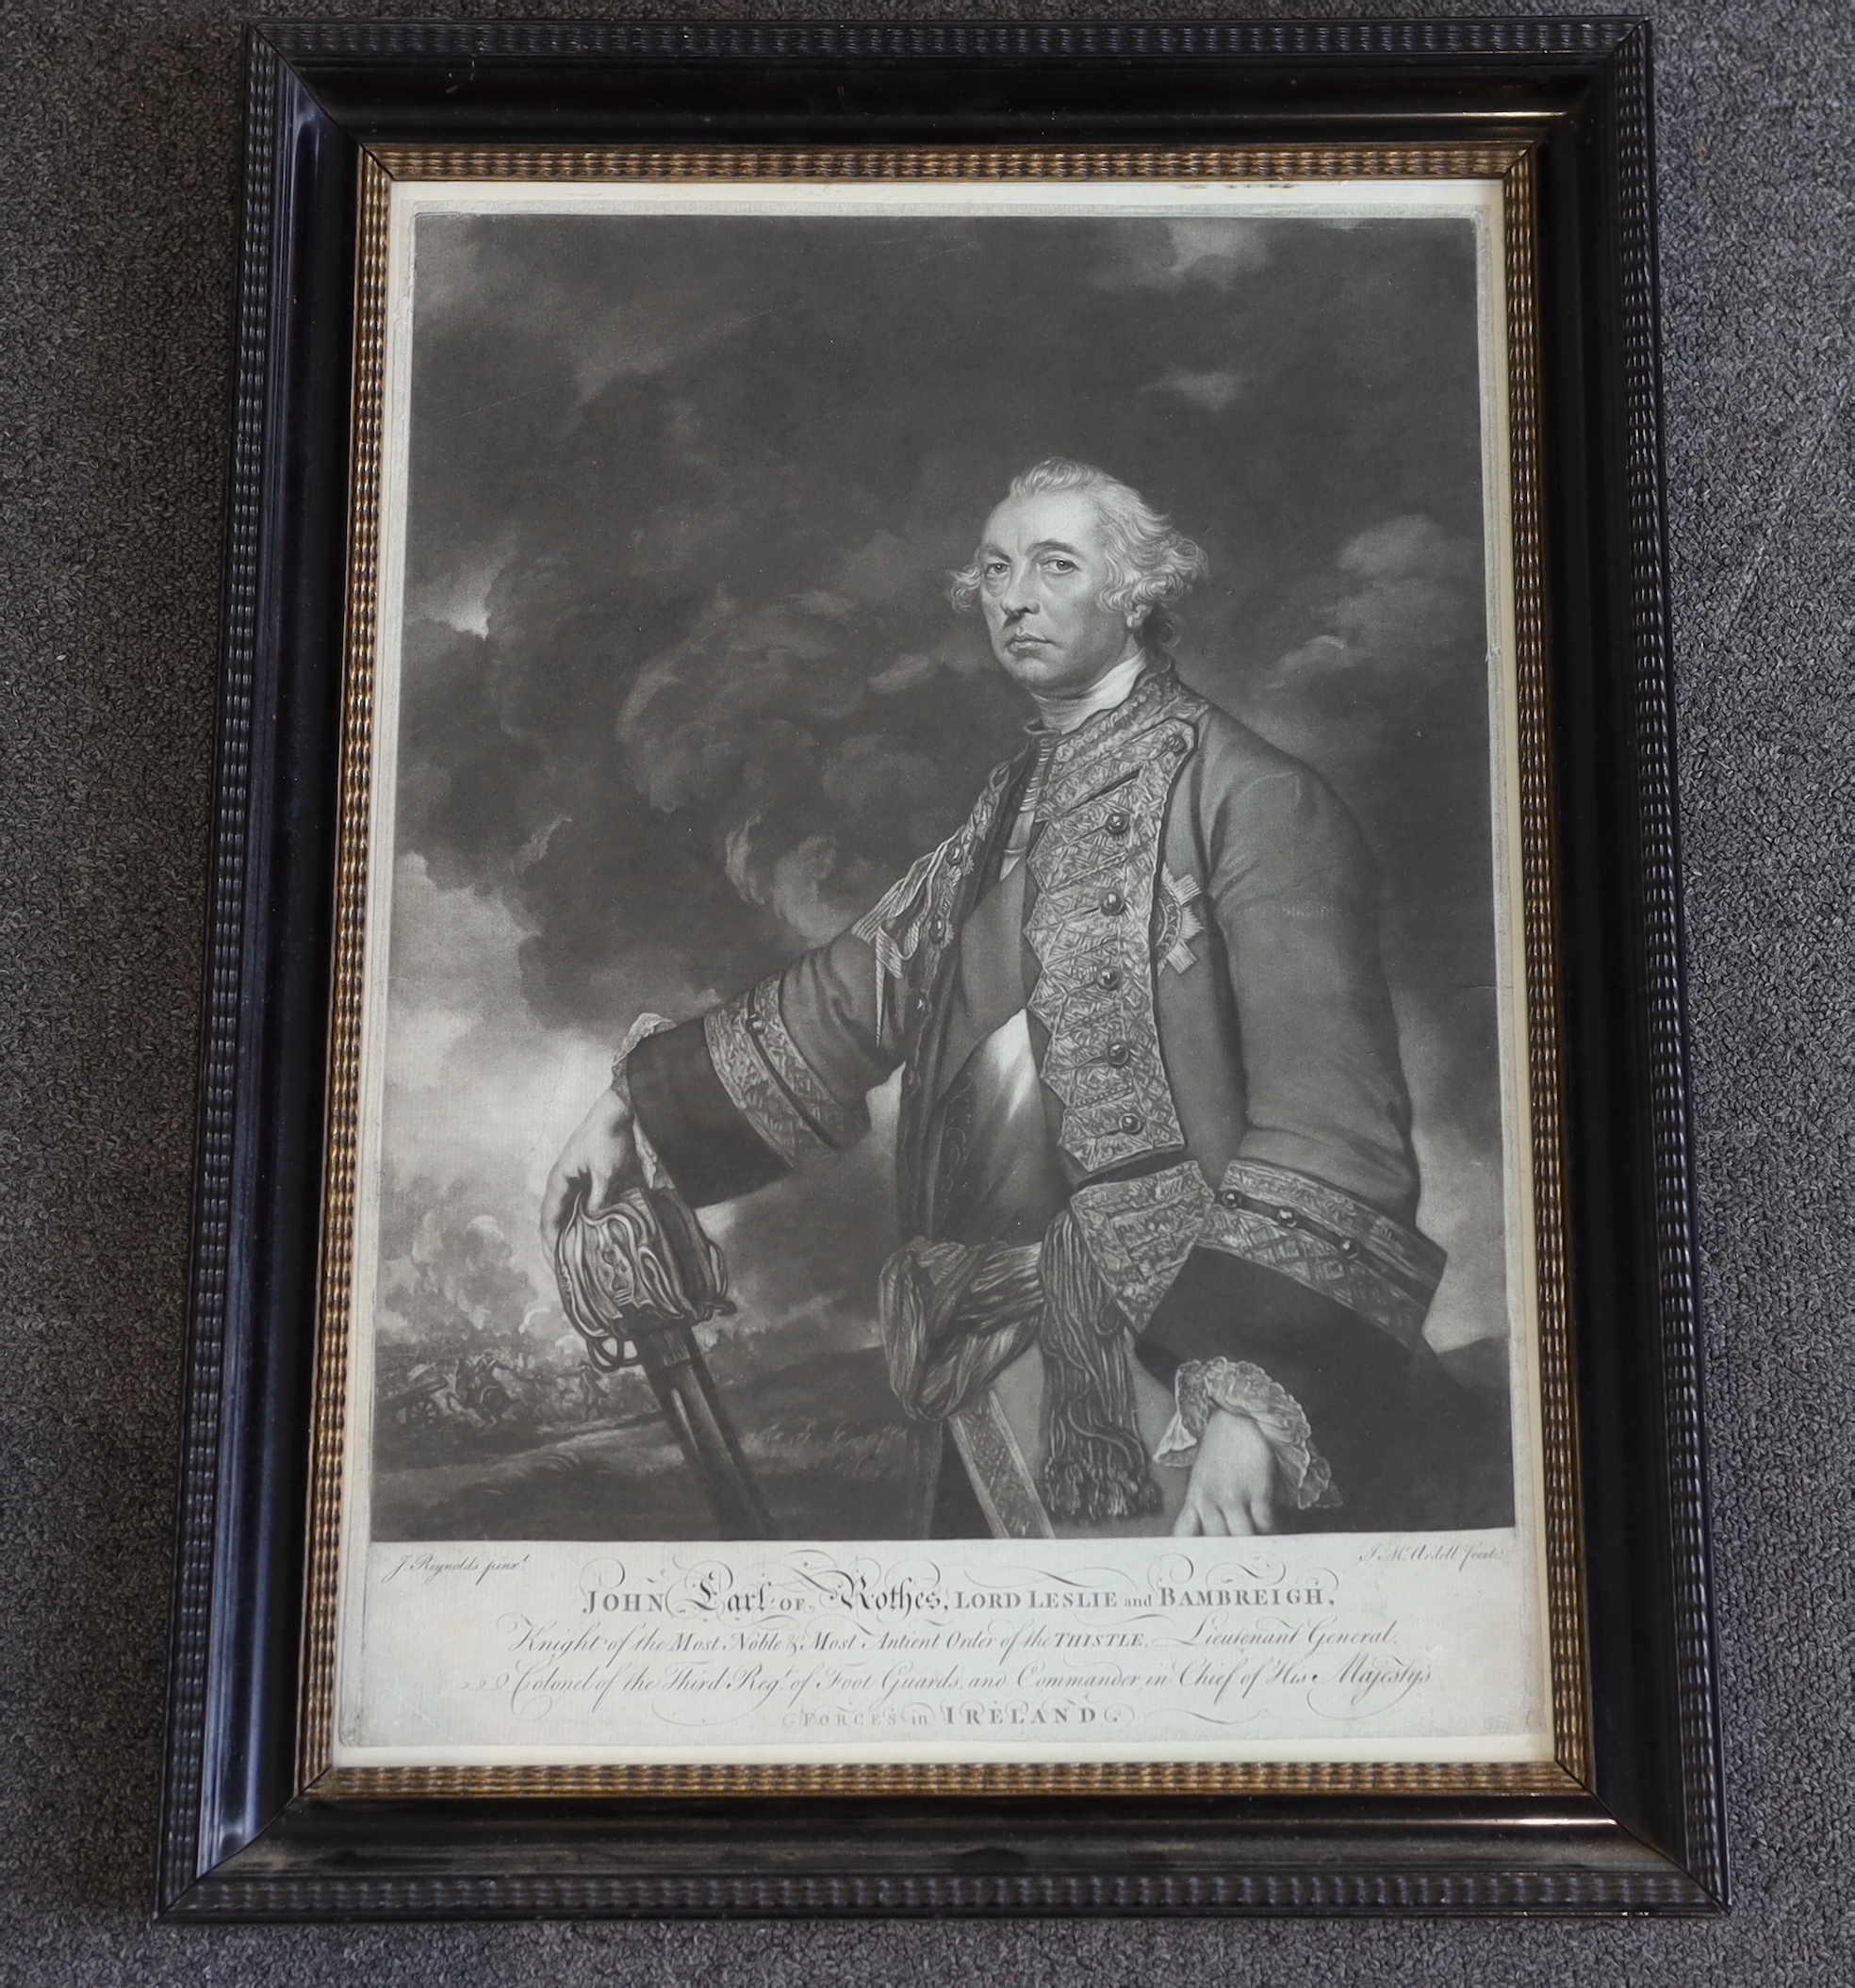 James McArdell after Sir Joshua Reynolds, mezzotint, 'Portrait of John Earl of Rothes, Lord Leslie and Bambreigh..', 1763, sheet overall 50.5 x 36cm